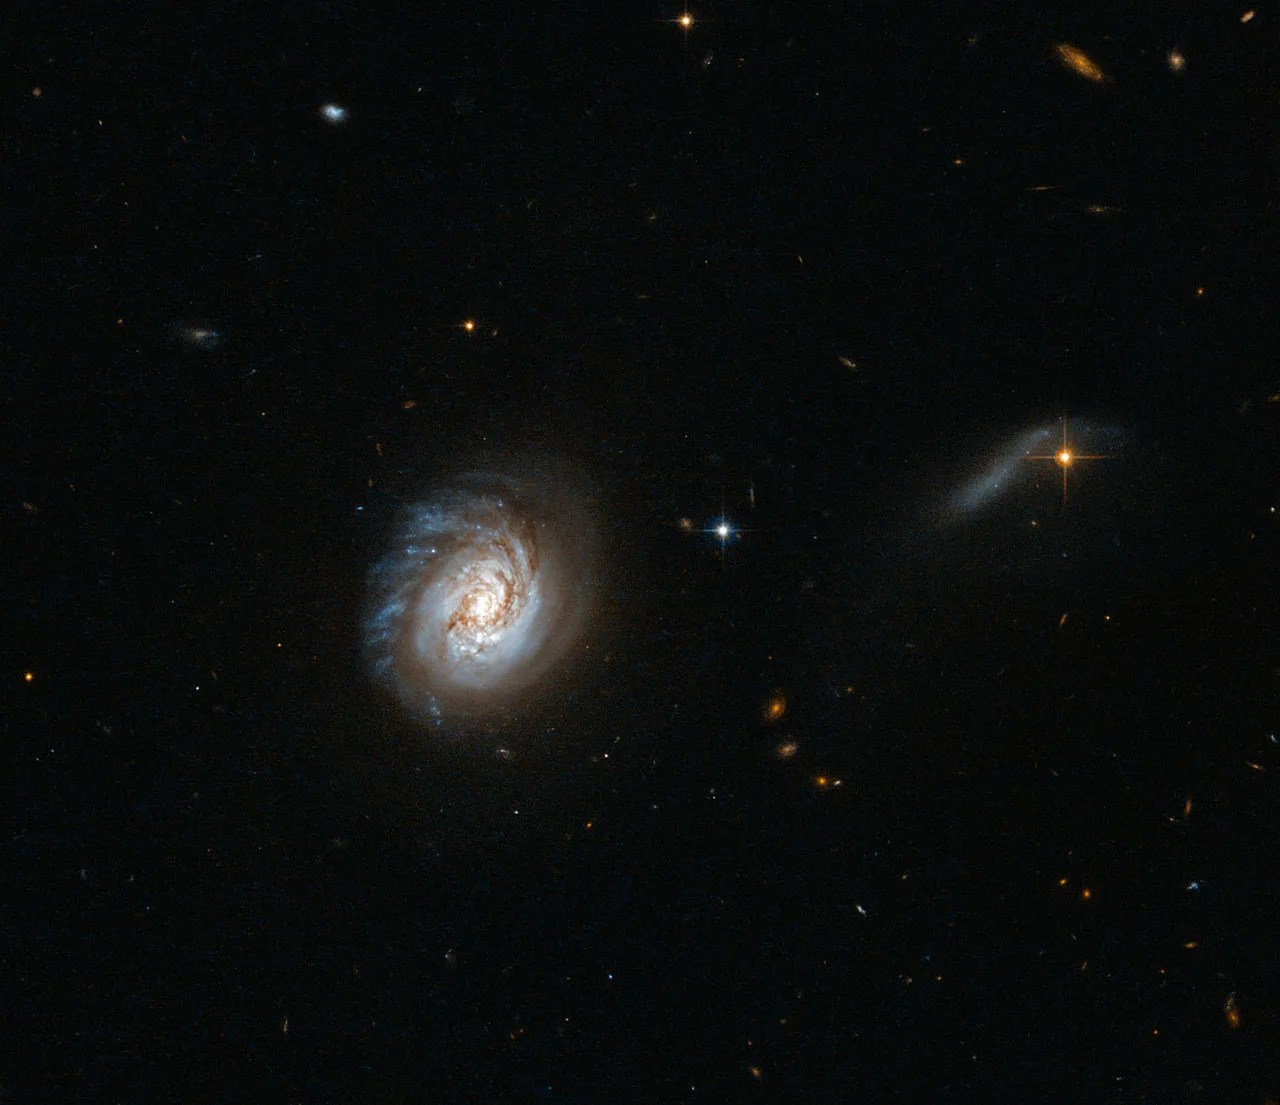 One large spiral galaxy shot with blue on the left arm, sprinkled around with bright blue and red stars and galaxies